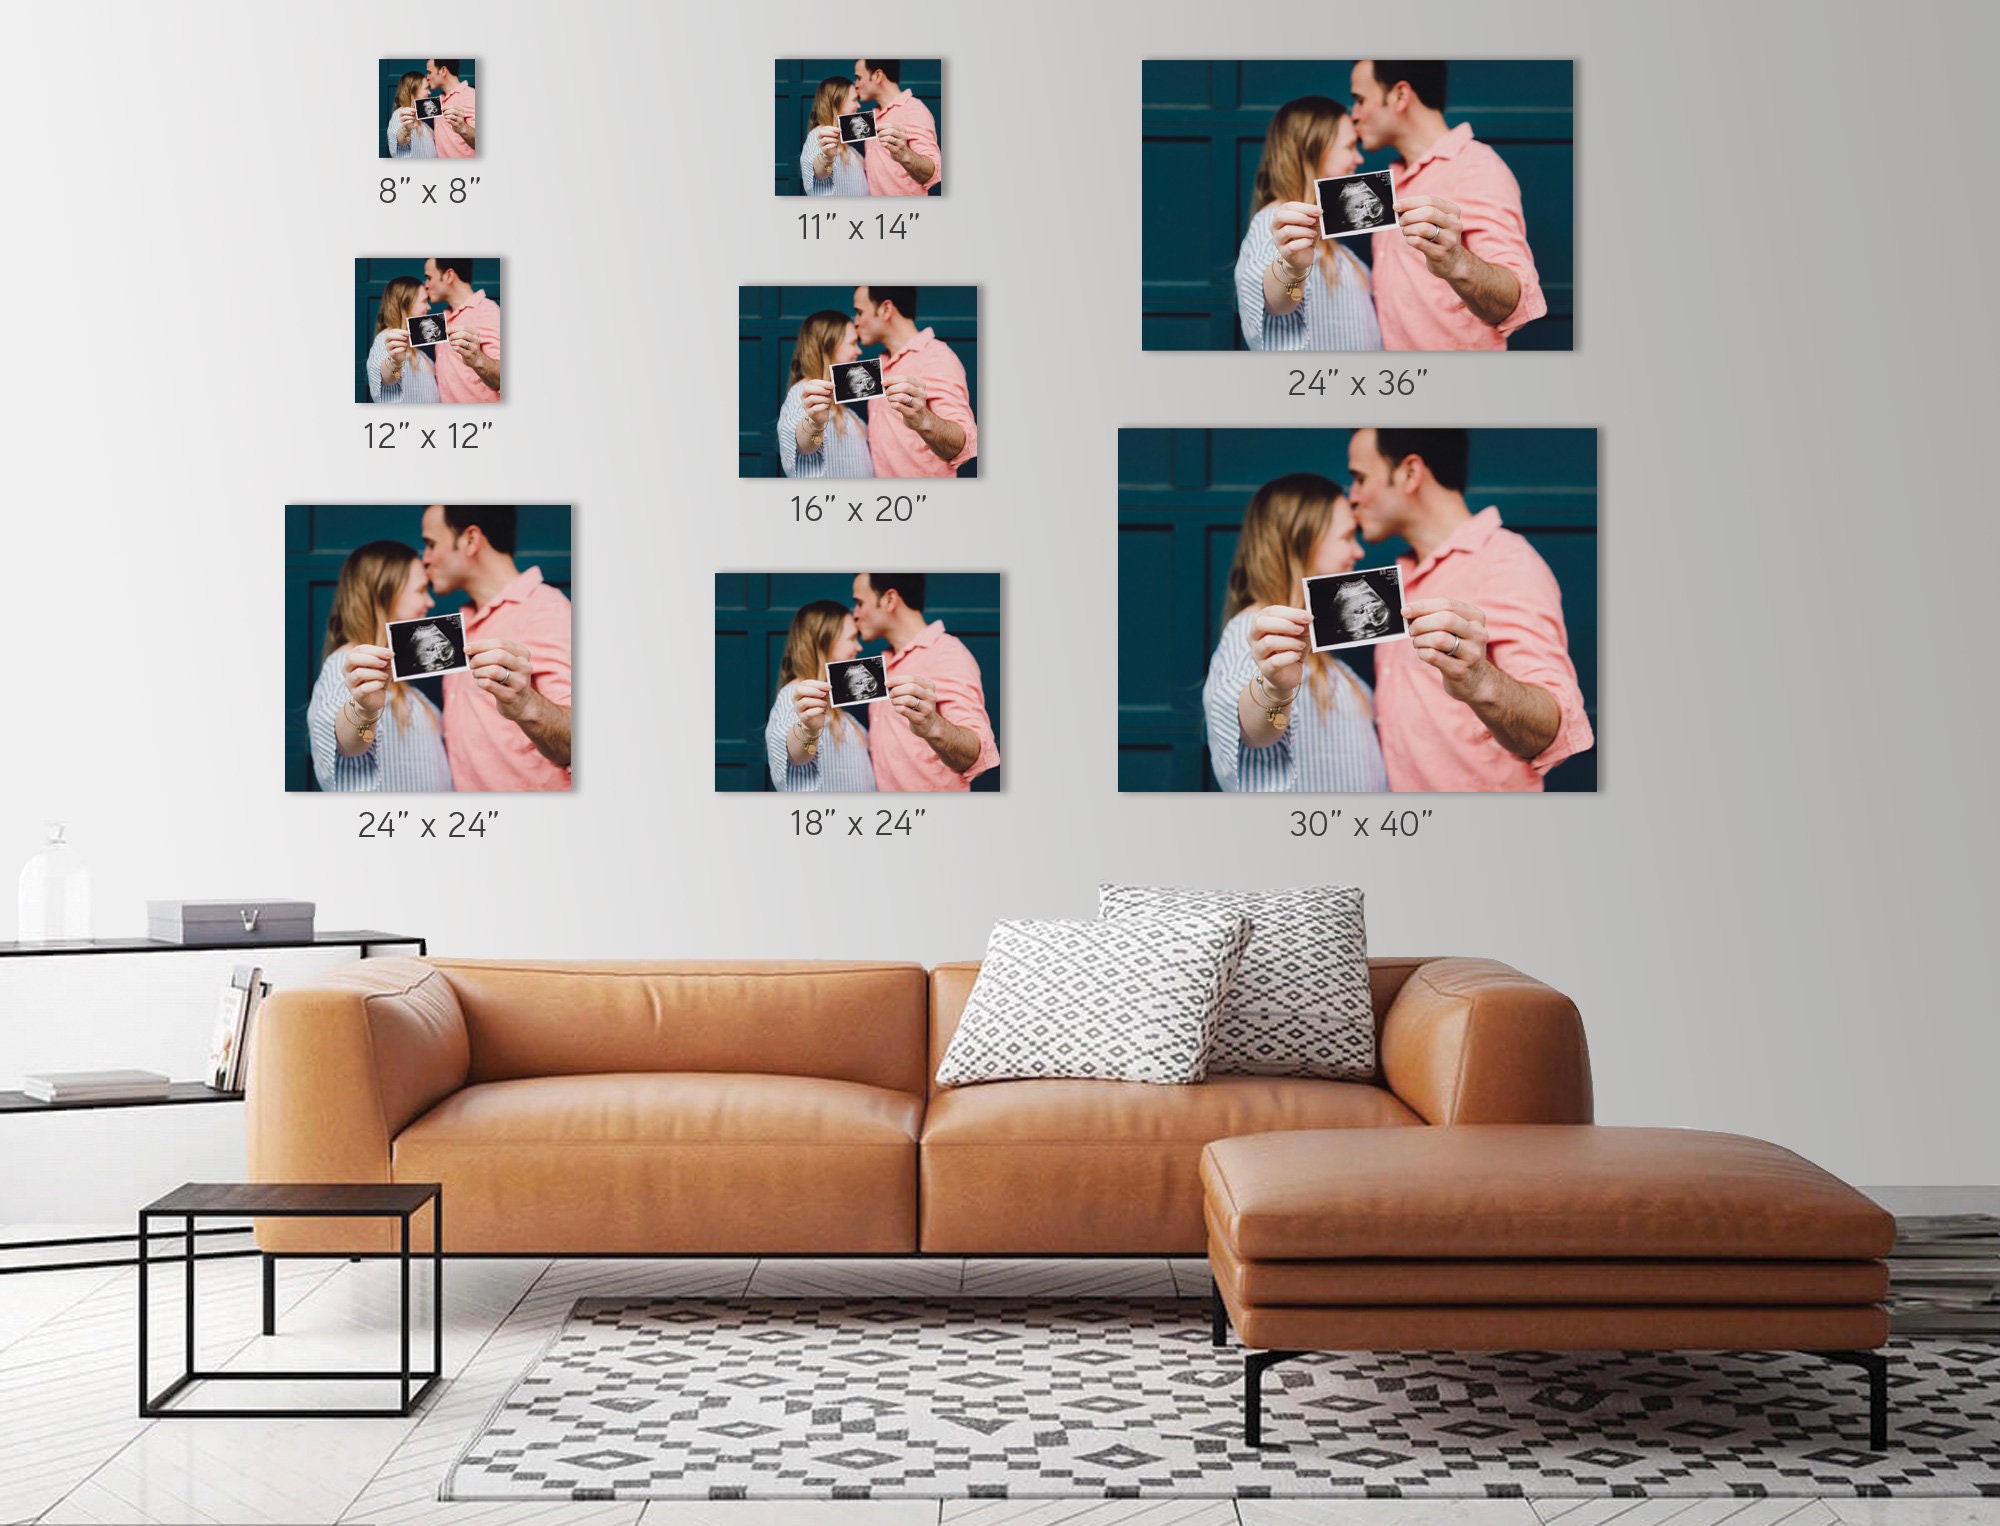 Custom Canvas Prints, Photo to Canvas, Family Photos, Wedding Pictures,  Wall Decor, Canvas Wall Art, Photography Prints 